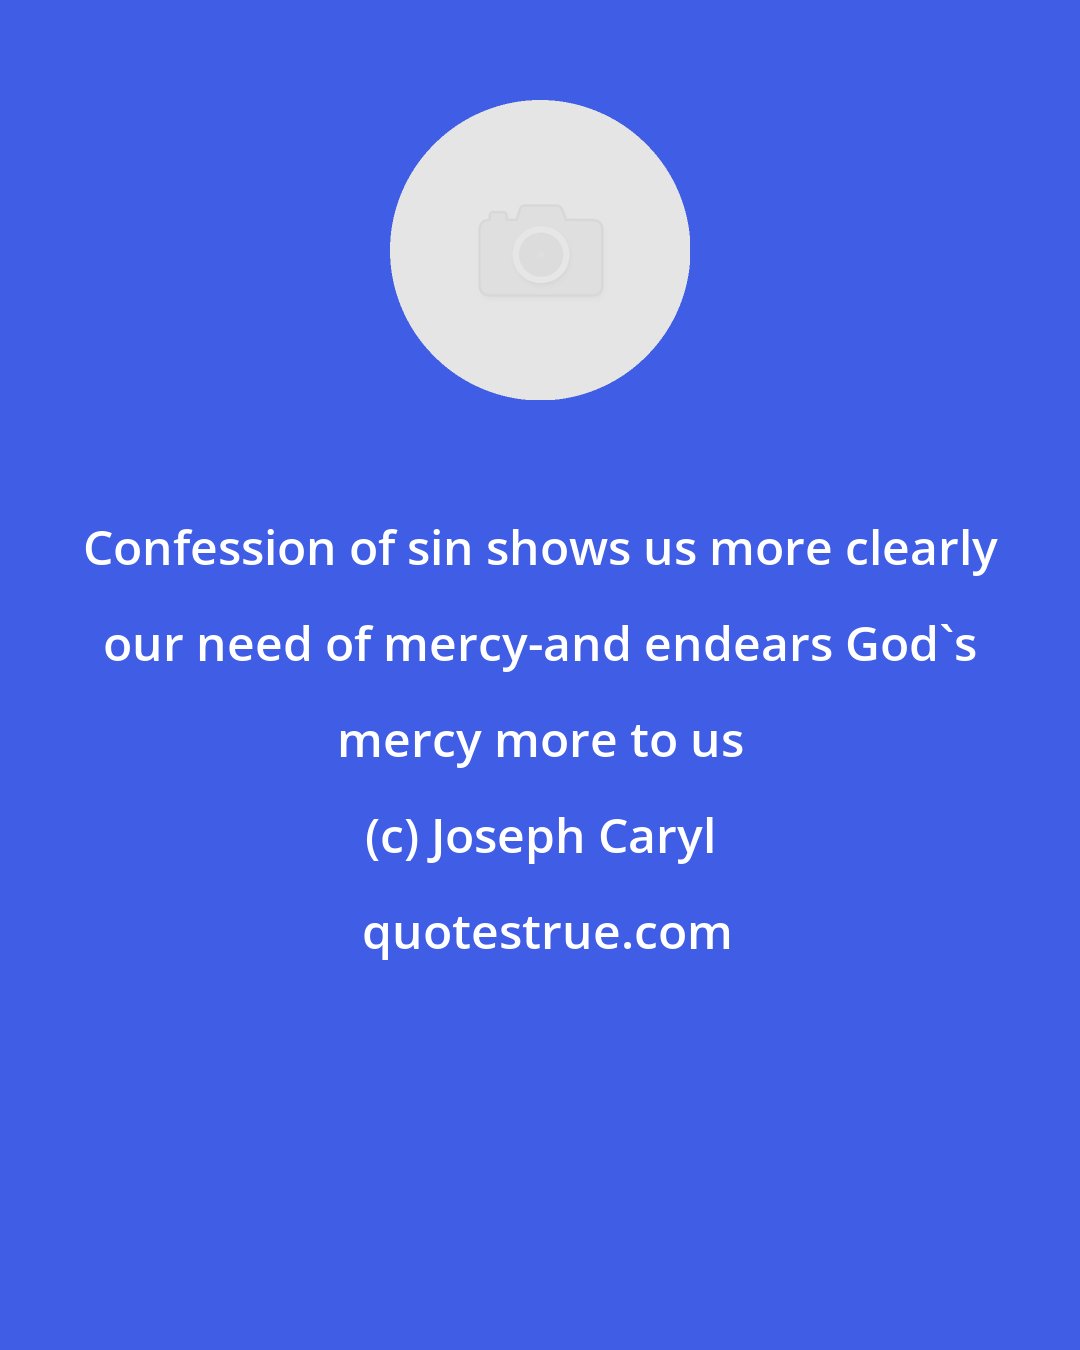 Joseph Caryl: Confession of sin shows us more clearly our need of mercy-and endears God's mercy more to us